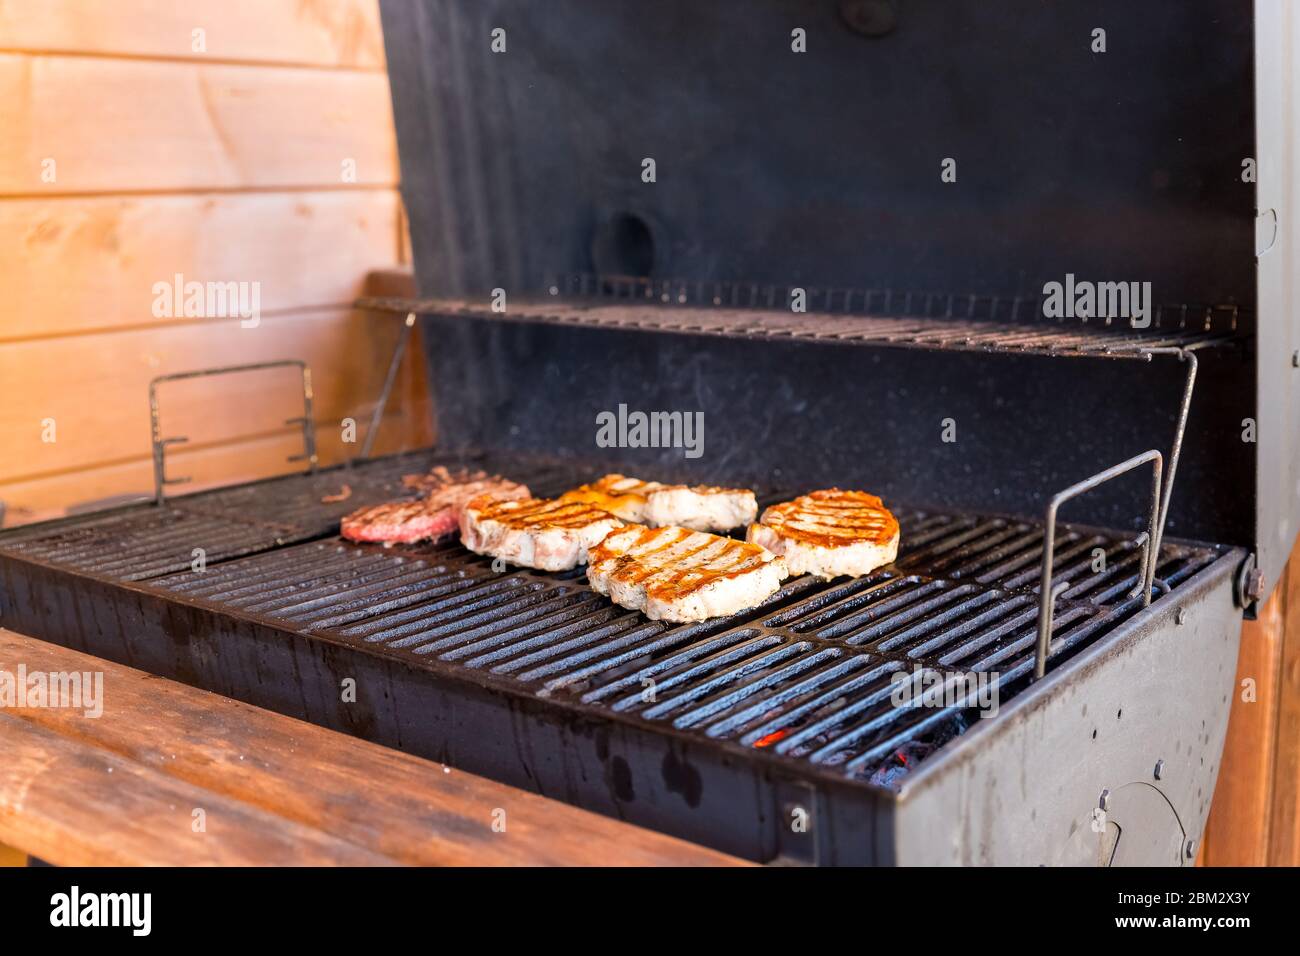 Entrecote Beef Steak On Grill With Rosemary Pepper And Salt -  Barbecue.Grilled beef fillet steaks with herbs and spices.Beef steak on the  grill grate Stock Photo - Alamy